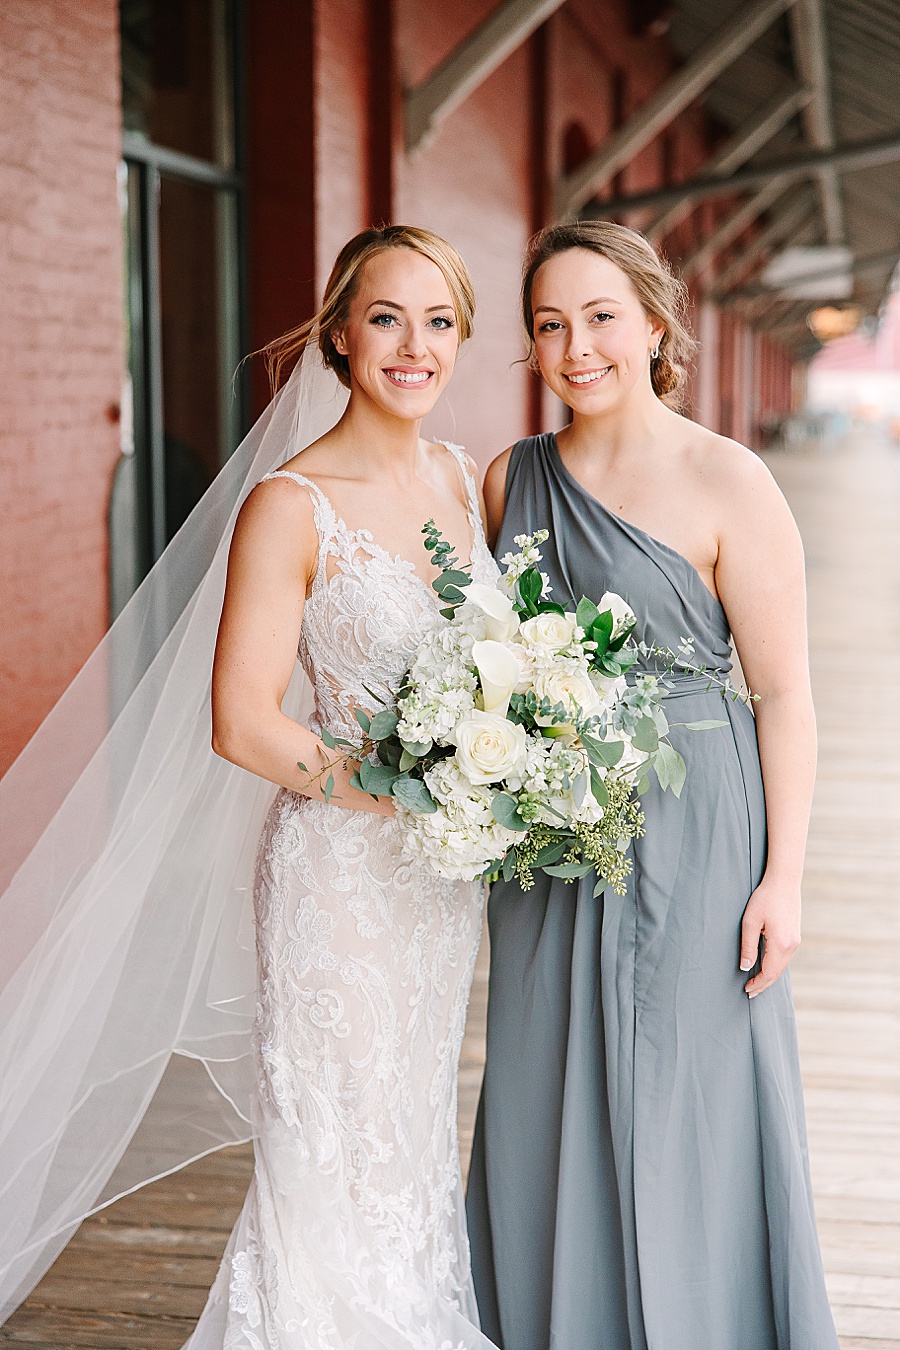 Bride and sister portrait at Jackson Terminal in Knoxville TN by Mandy Hart Photo, Knoxville TN Wedding Photographer